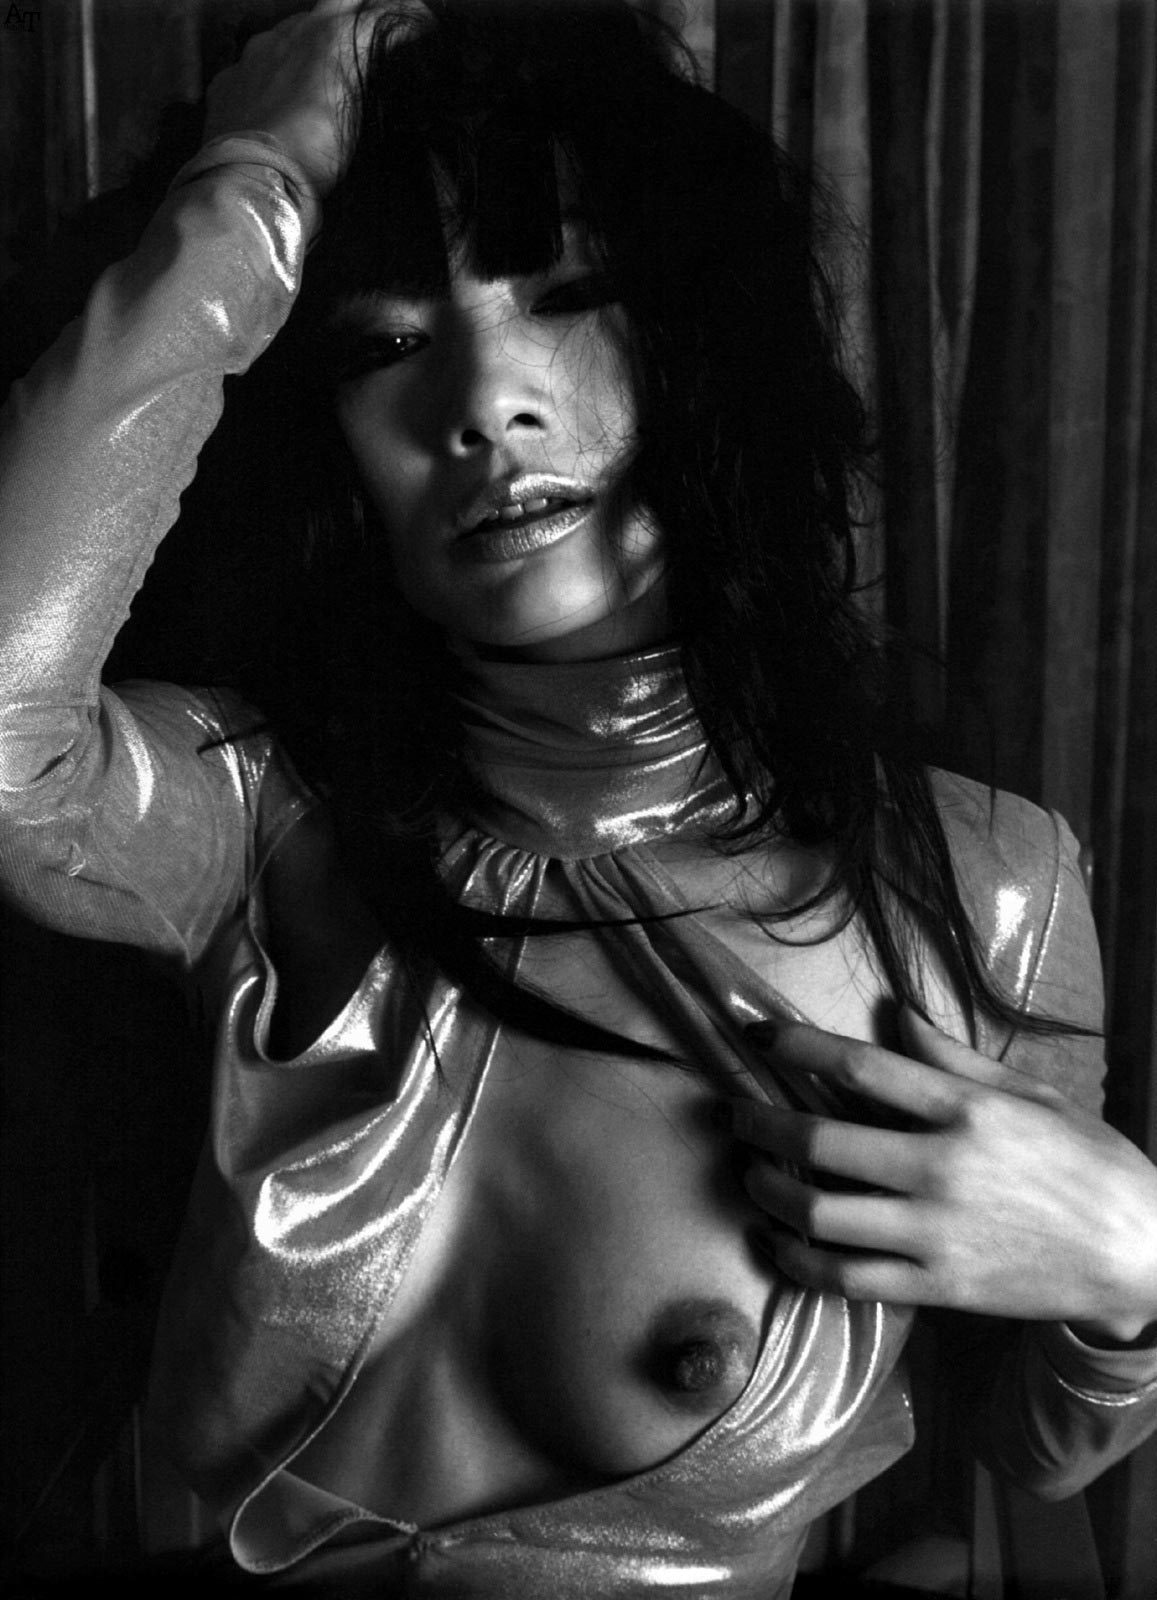 Bai Ling and her amazing nipples in studio-style shots. 